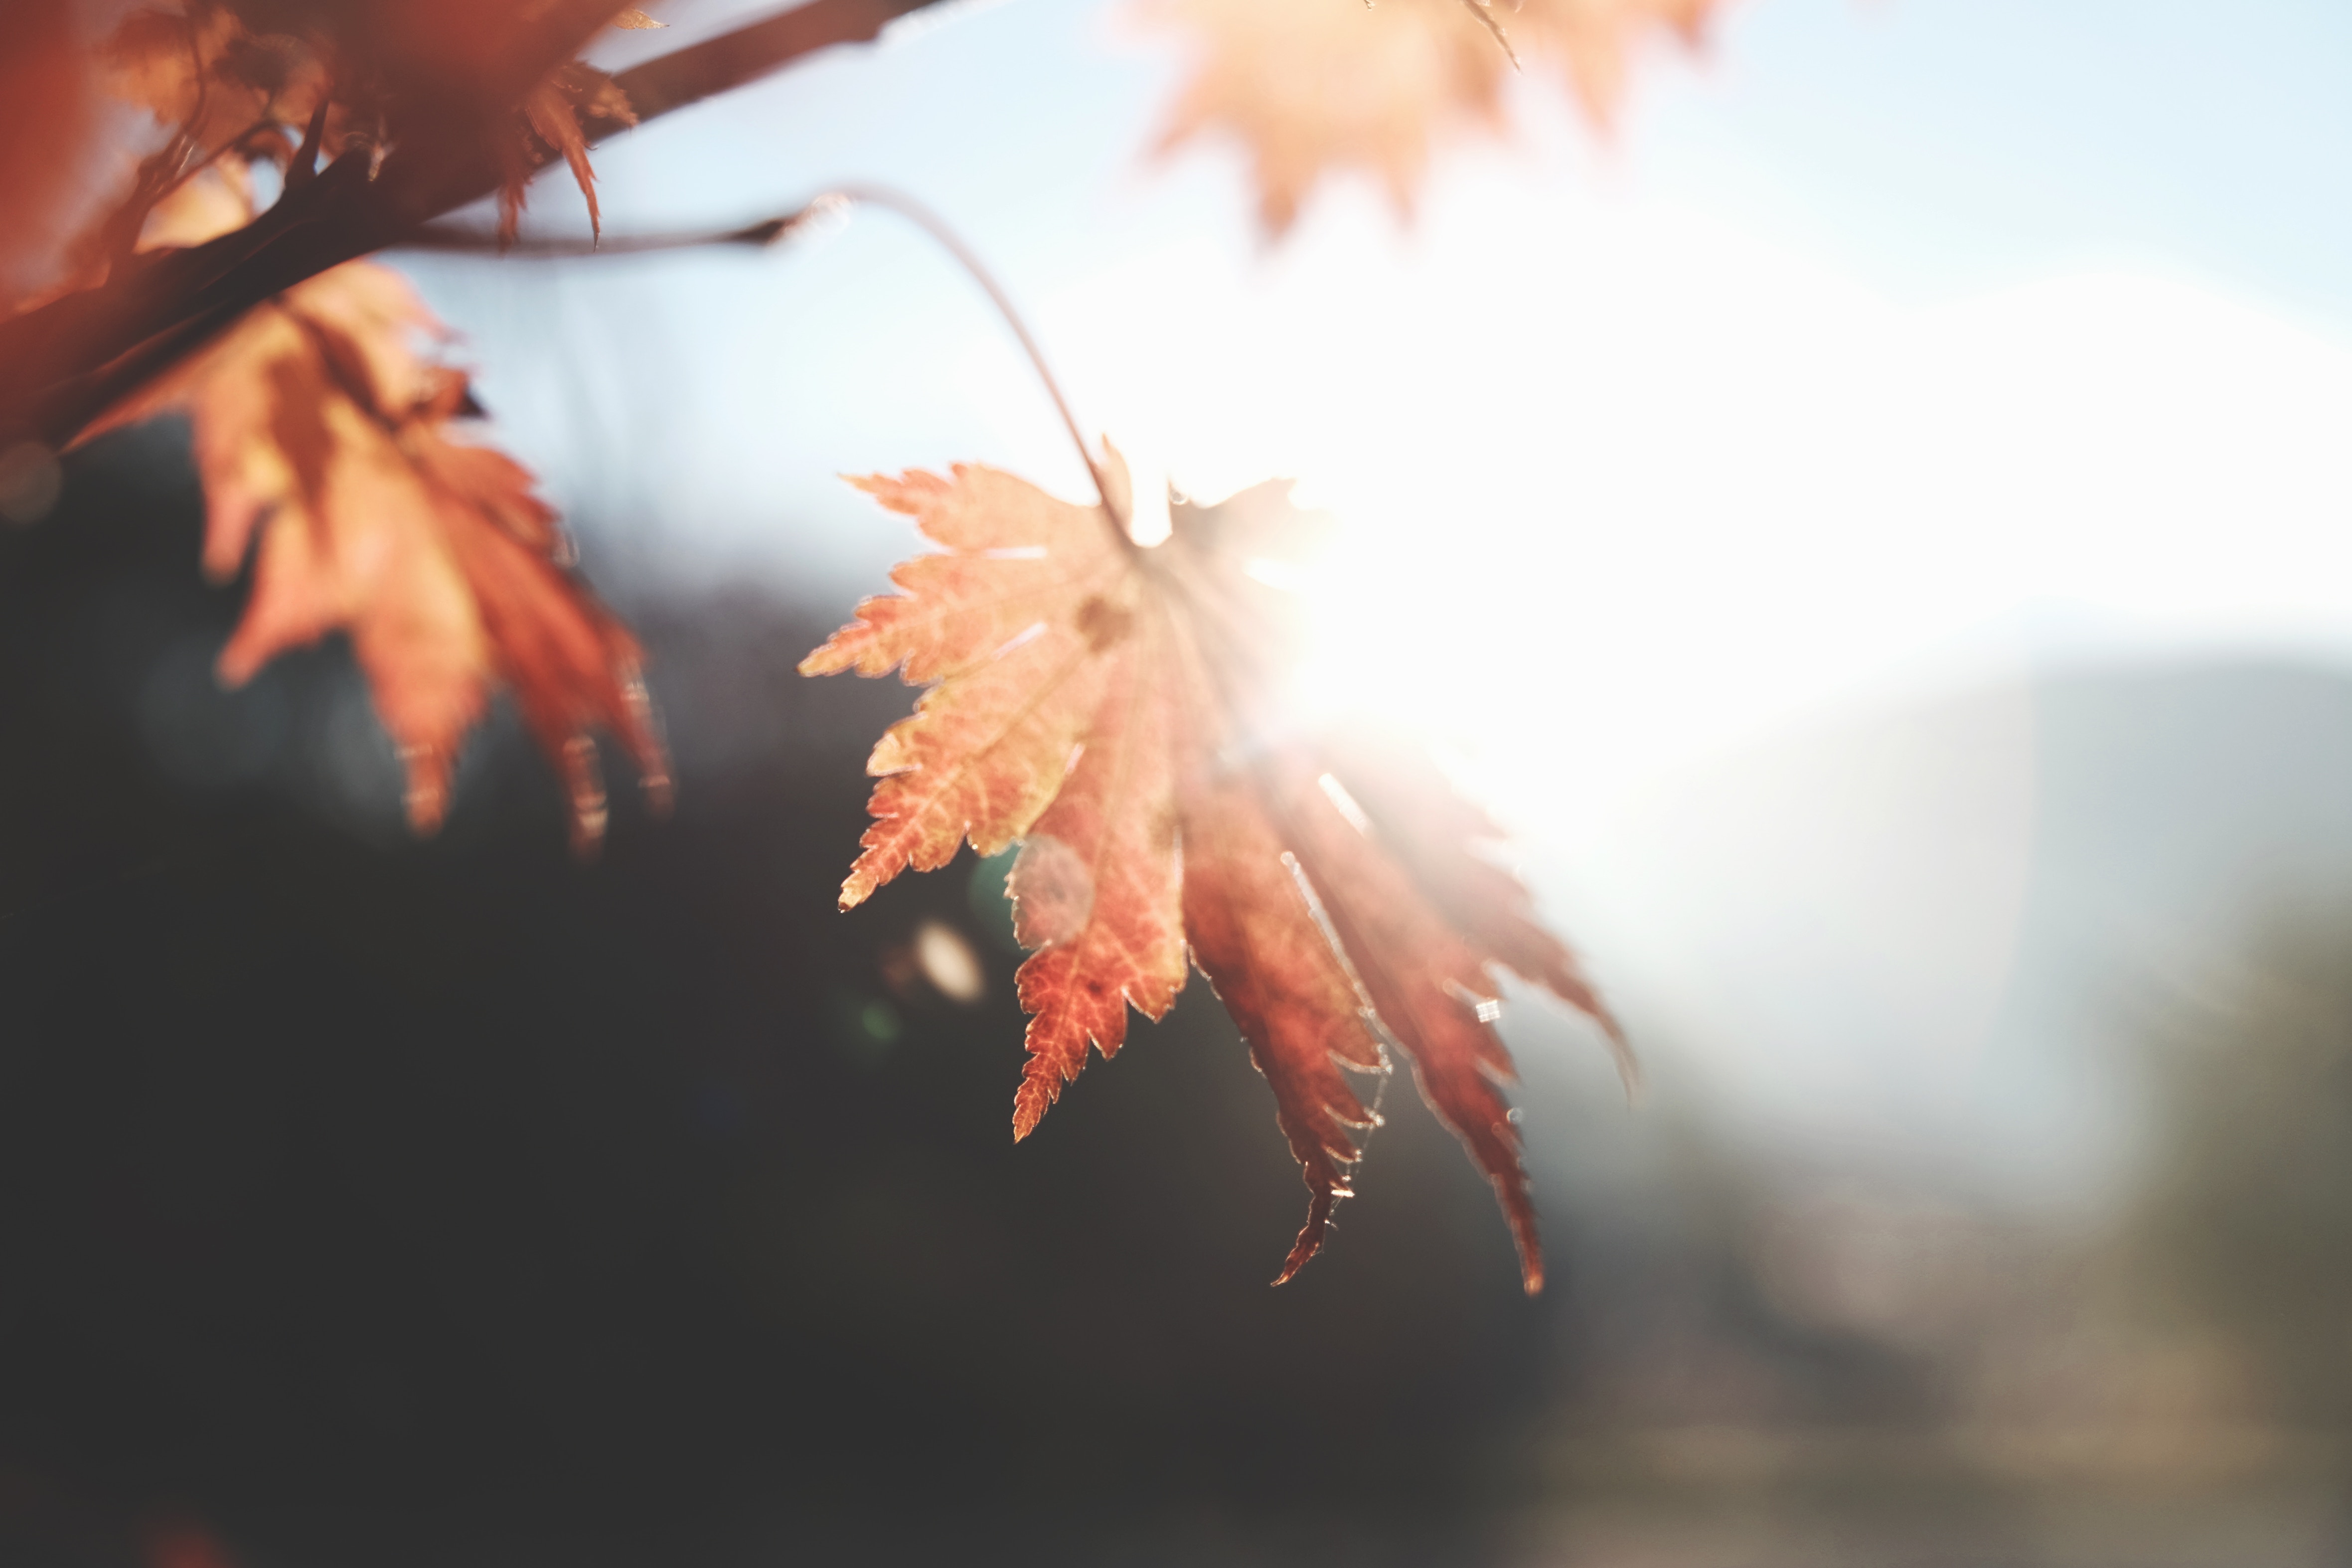 4719x3146 #branch, #autumn, #view, #sunlight, #bokeh, #fall, #leaves, #glow, #wallpaper, #forest, #maple, #flare, #Creative Commons image, #tree, #season, #blur, #leafe, #leaf, #nature, #sun flare, #background. Mocah HD Wallpaper